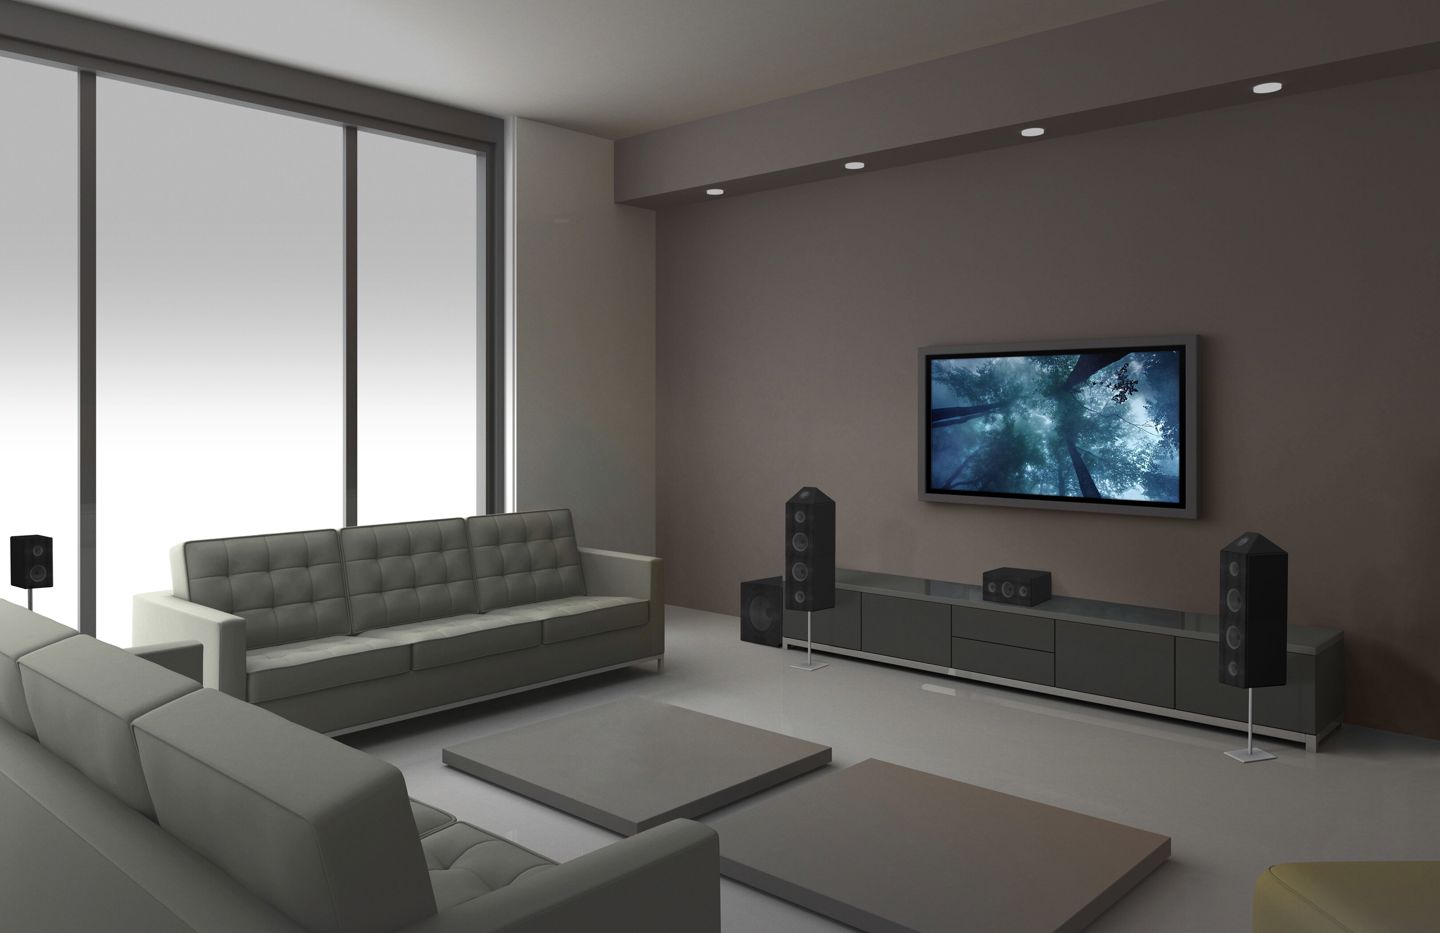 The future of immersive audio for Smart TV with Dolby Atmos FlexConnect,  powered by MediaTek